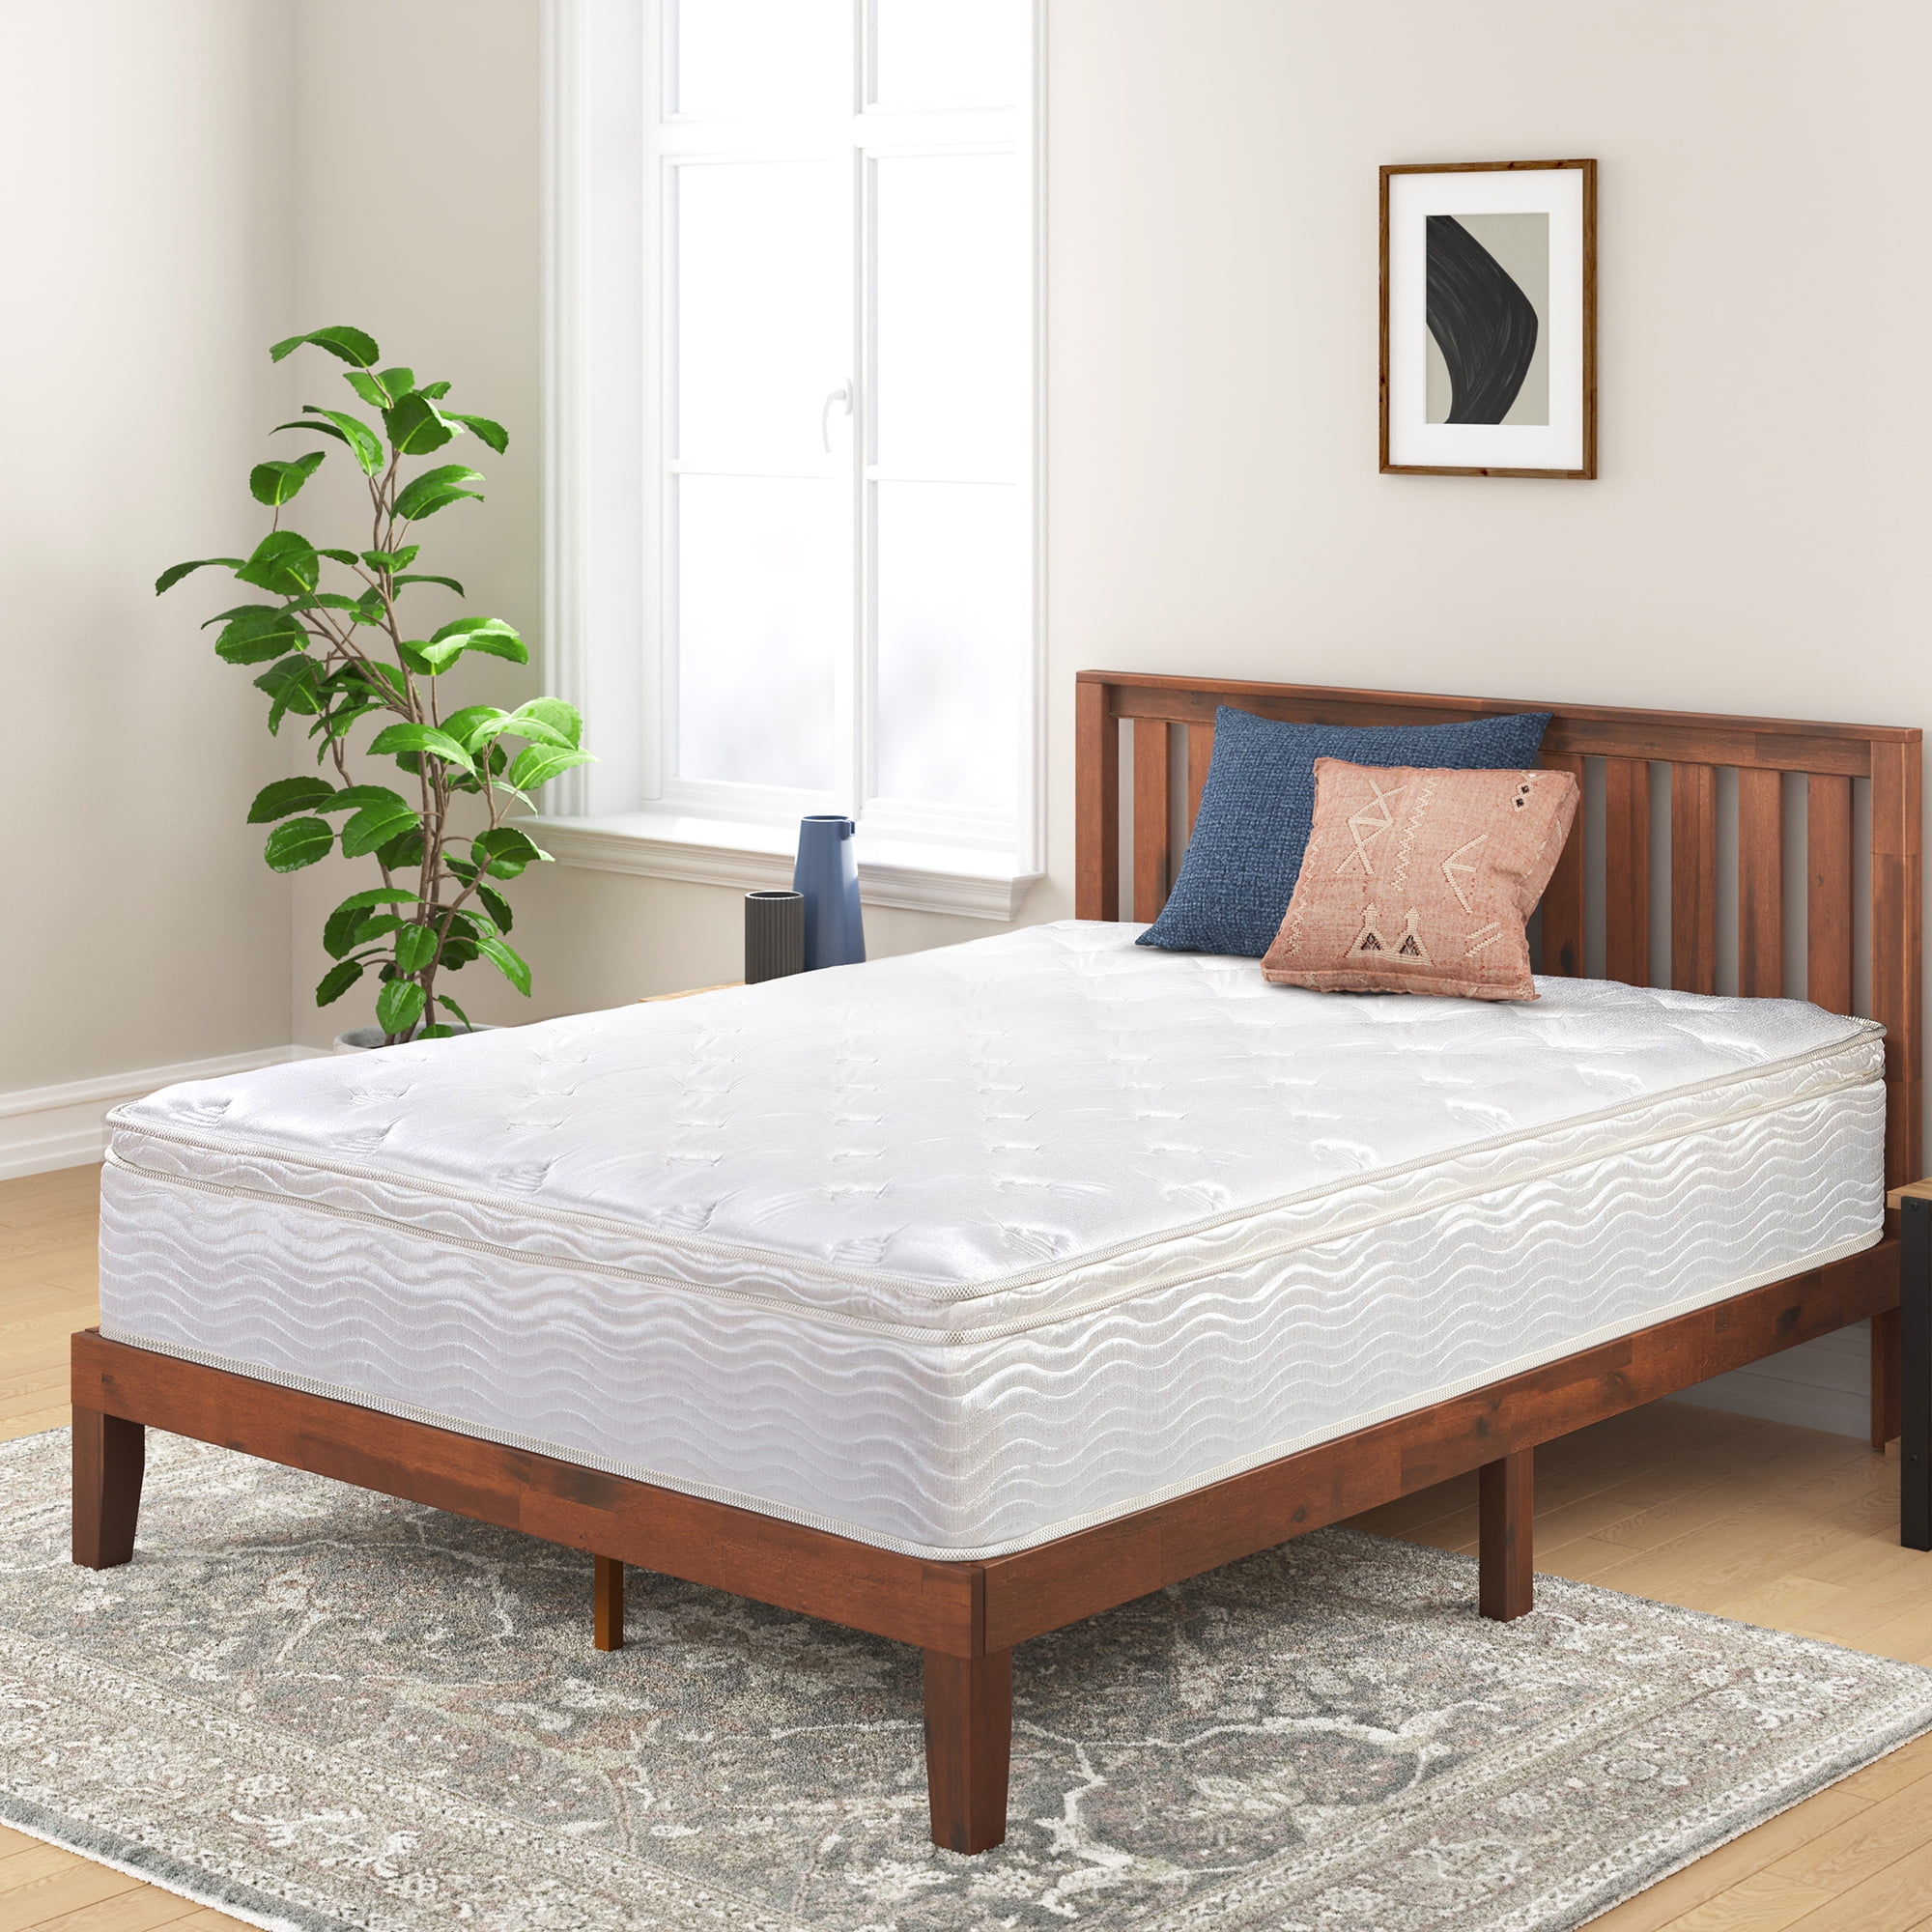 Slumber 1 By Zinus 12" Support Innerspring Mattress (Queen) $94, (King) $154 + Free Shipping